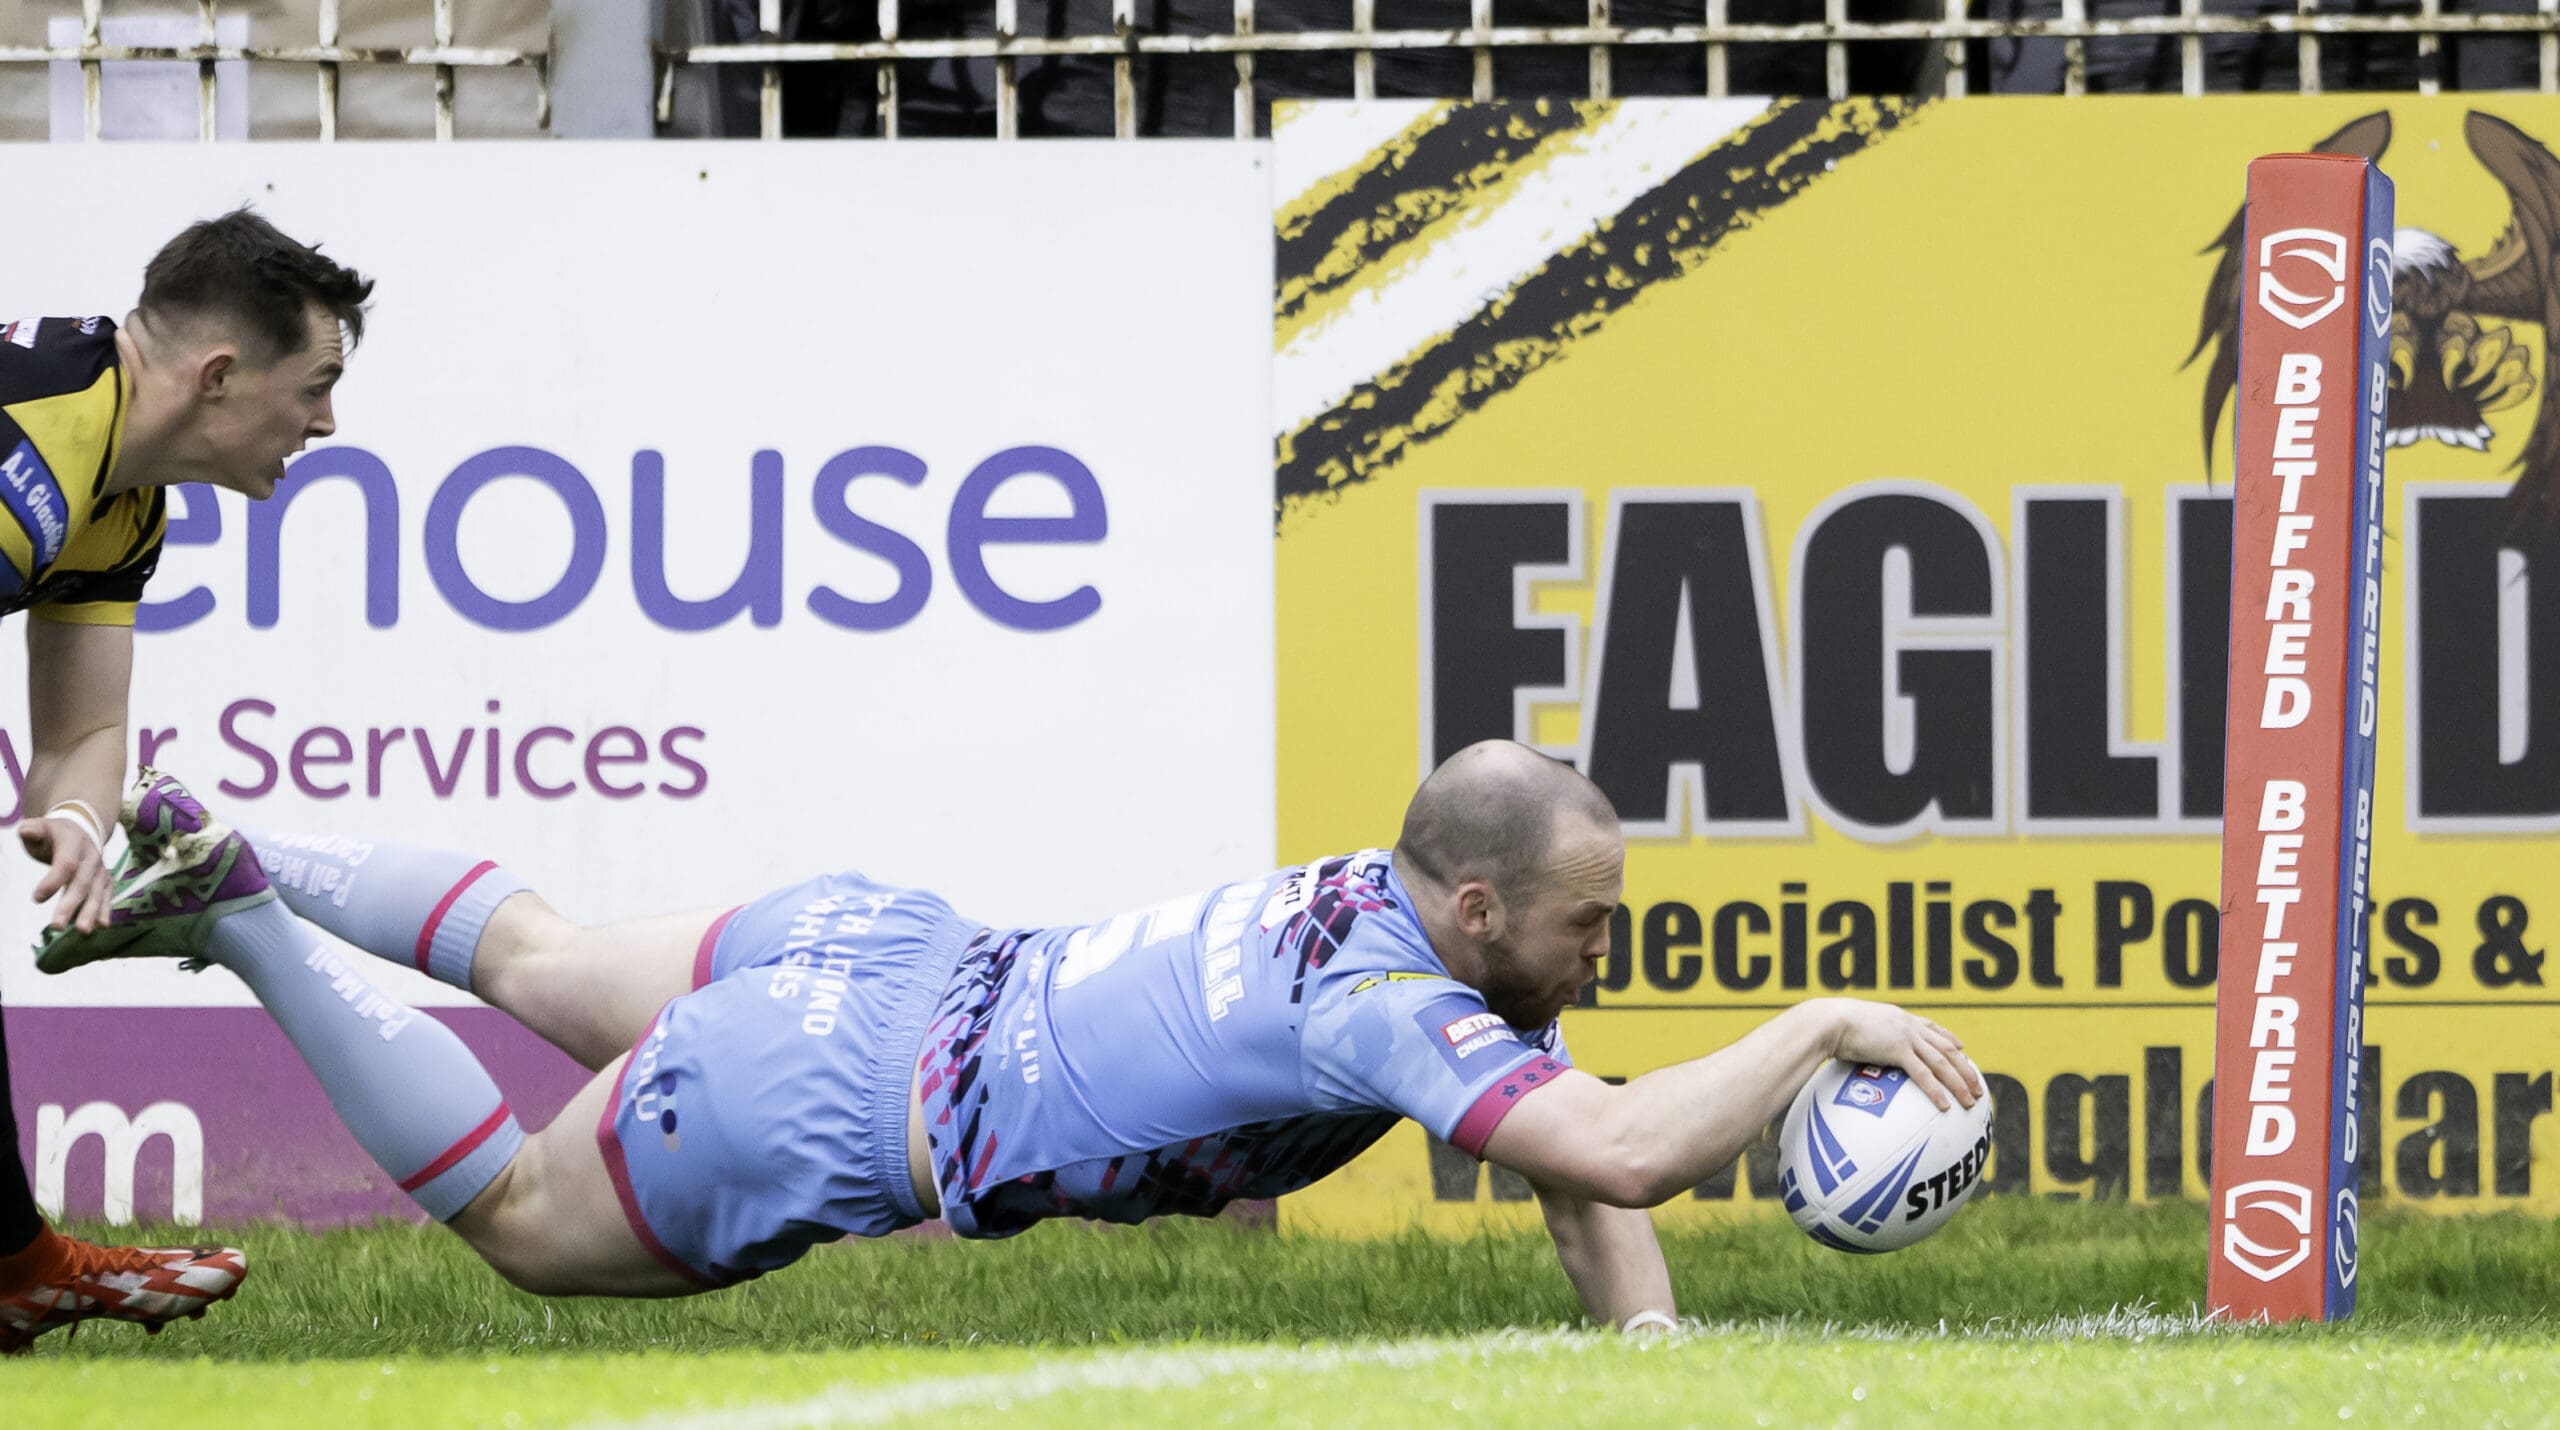 Hull KR vs Wigan Warriors Predictions: 13/2 tip for statement victory